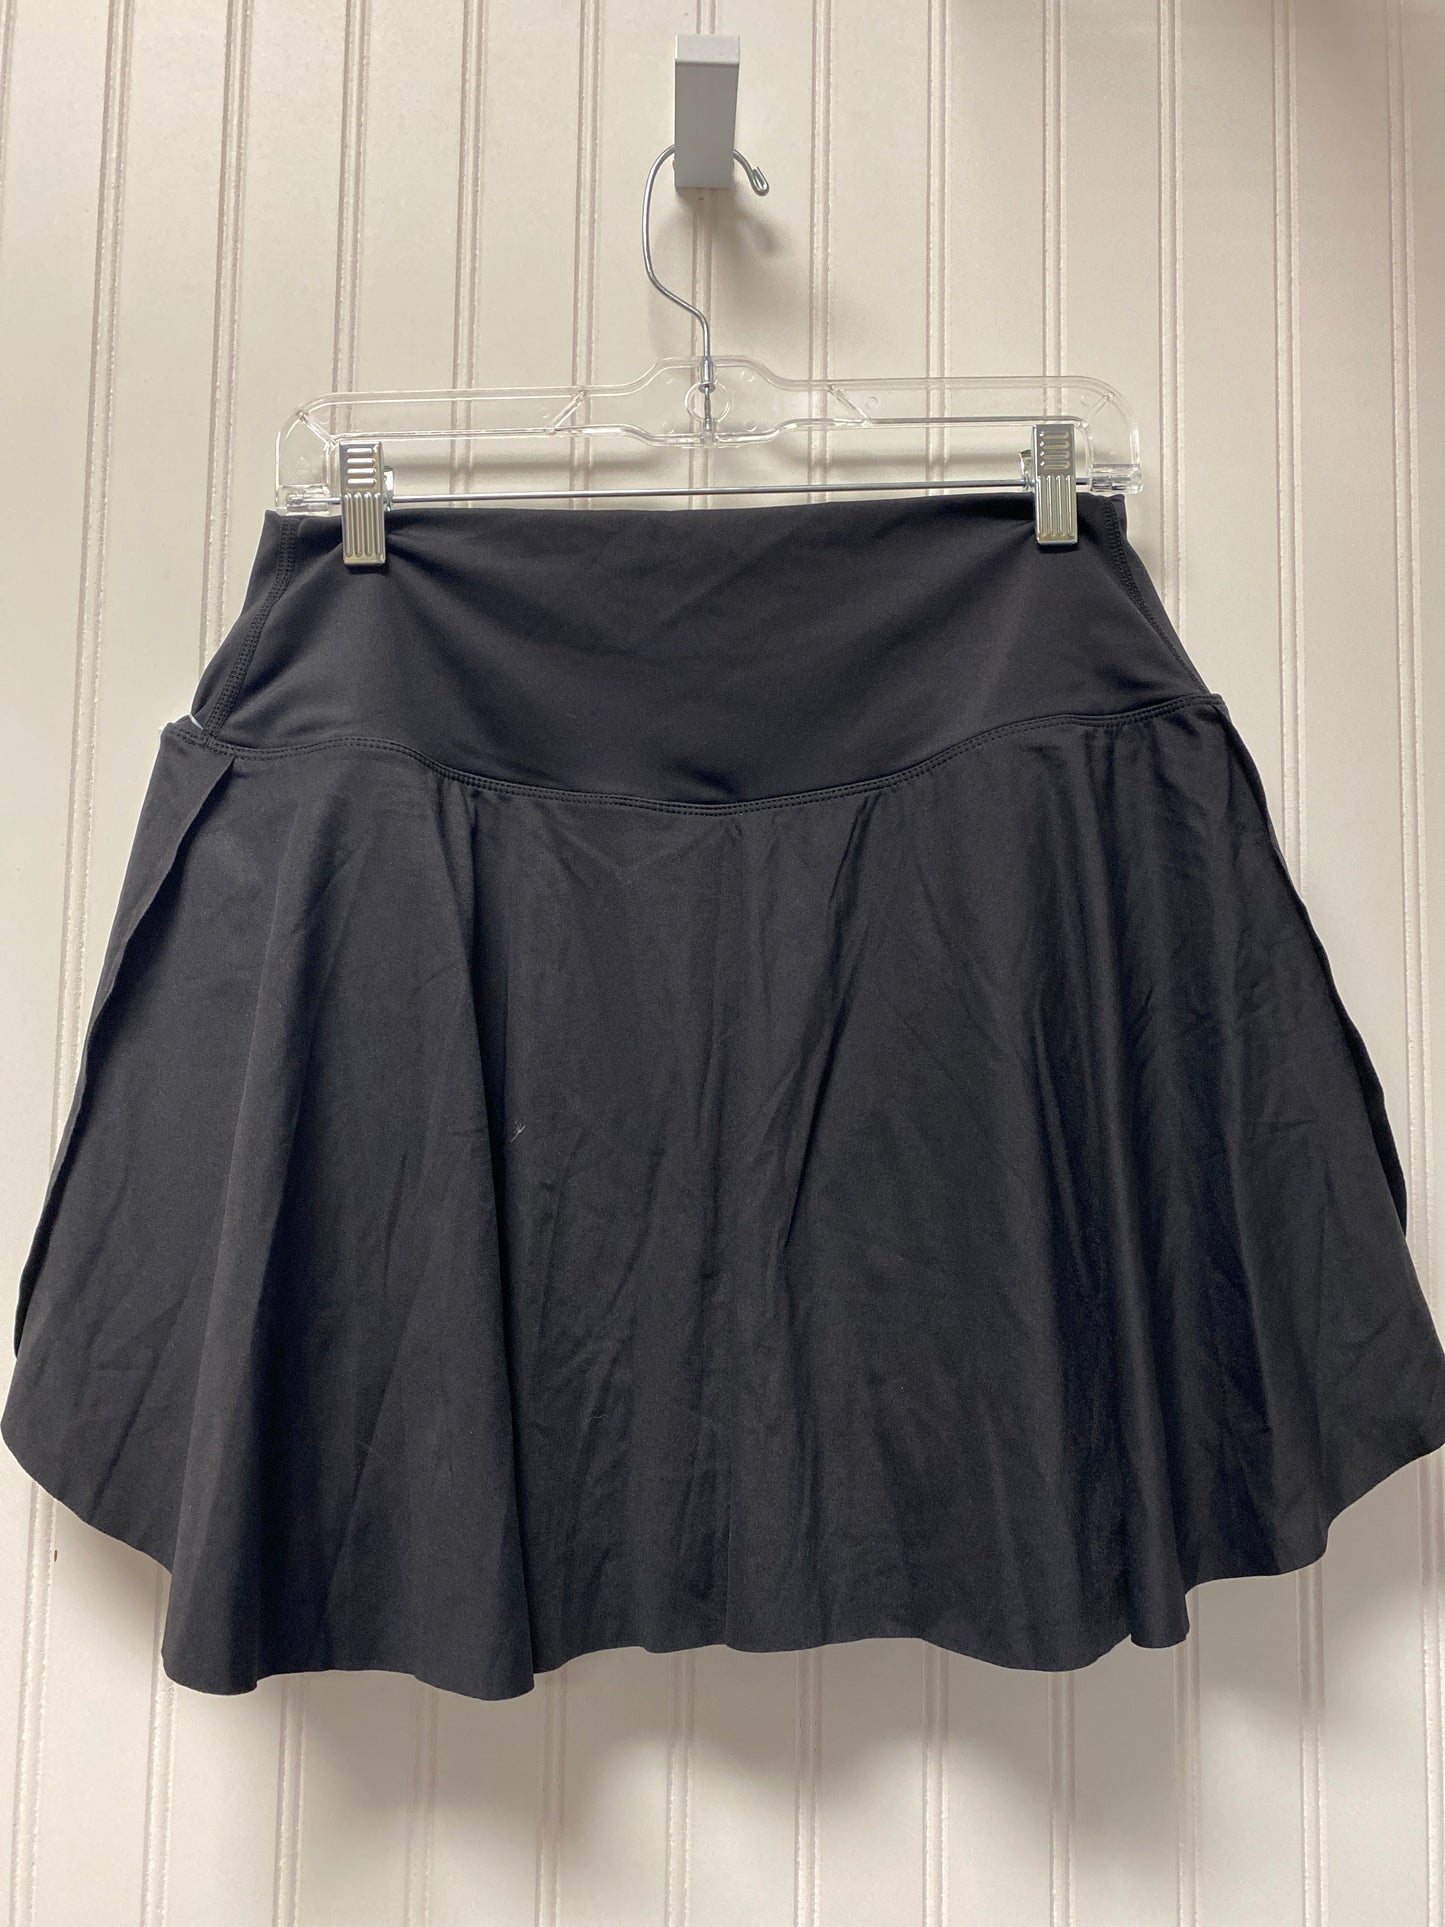 Athletic Skort By Clothes Mentor  Size: 1x